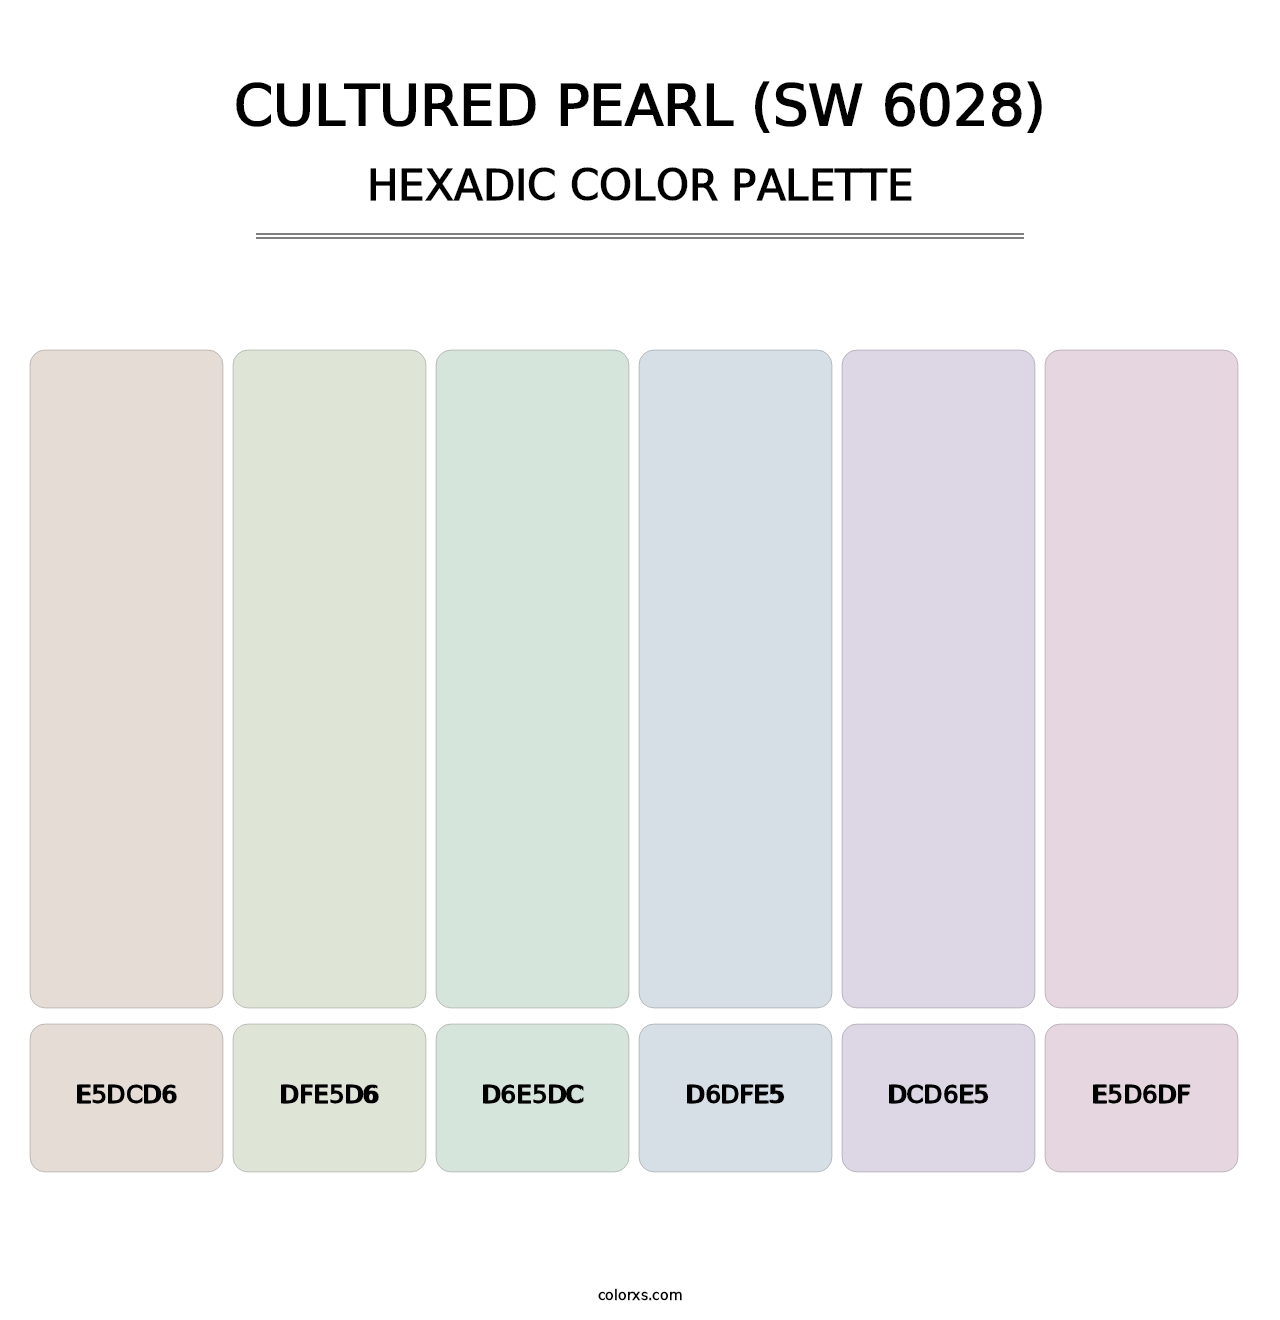 Cultured Pearl (SW 6028) - Hexadic Color Palette